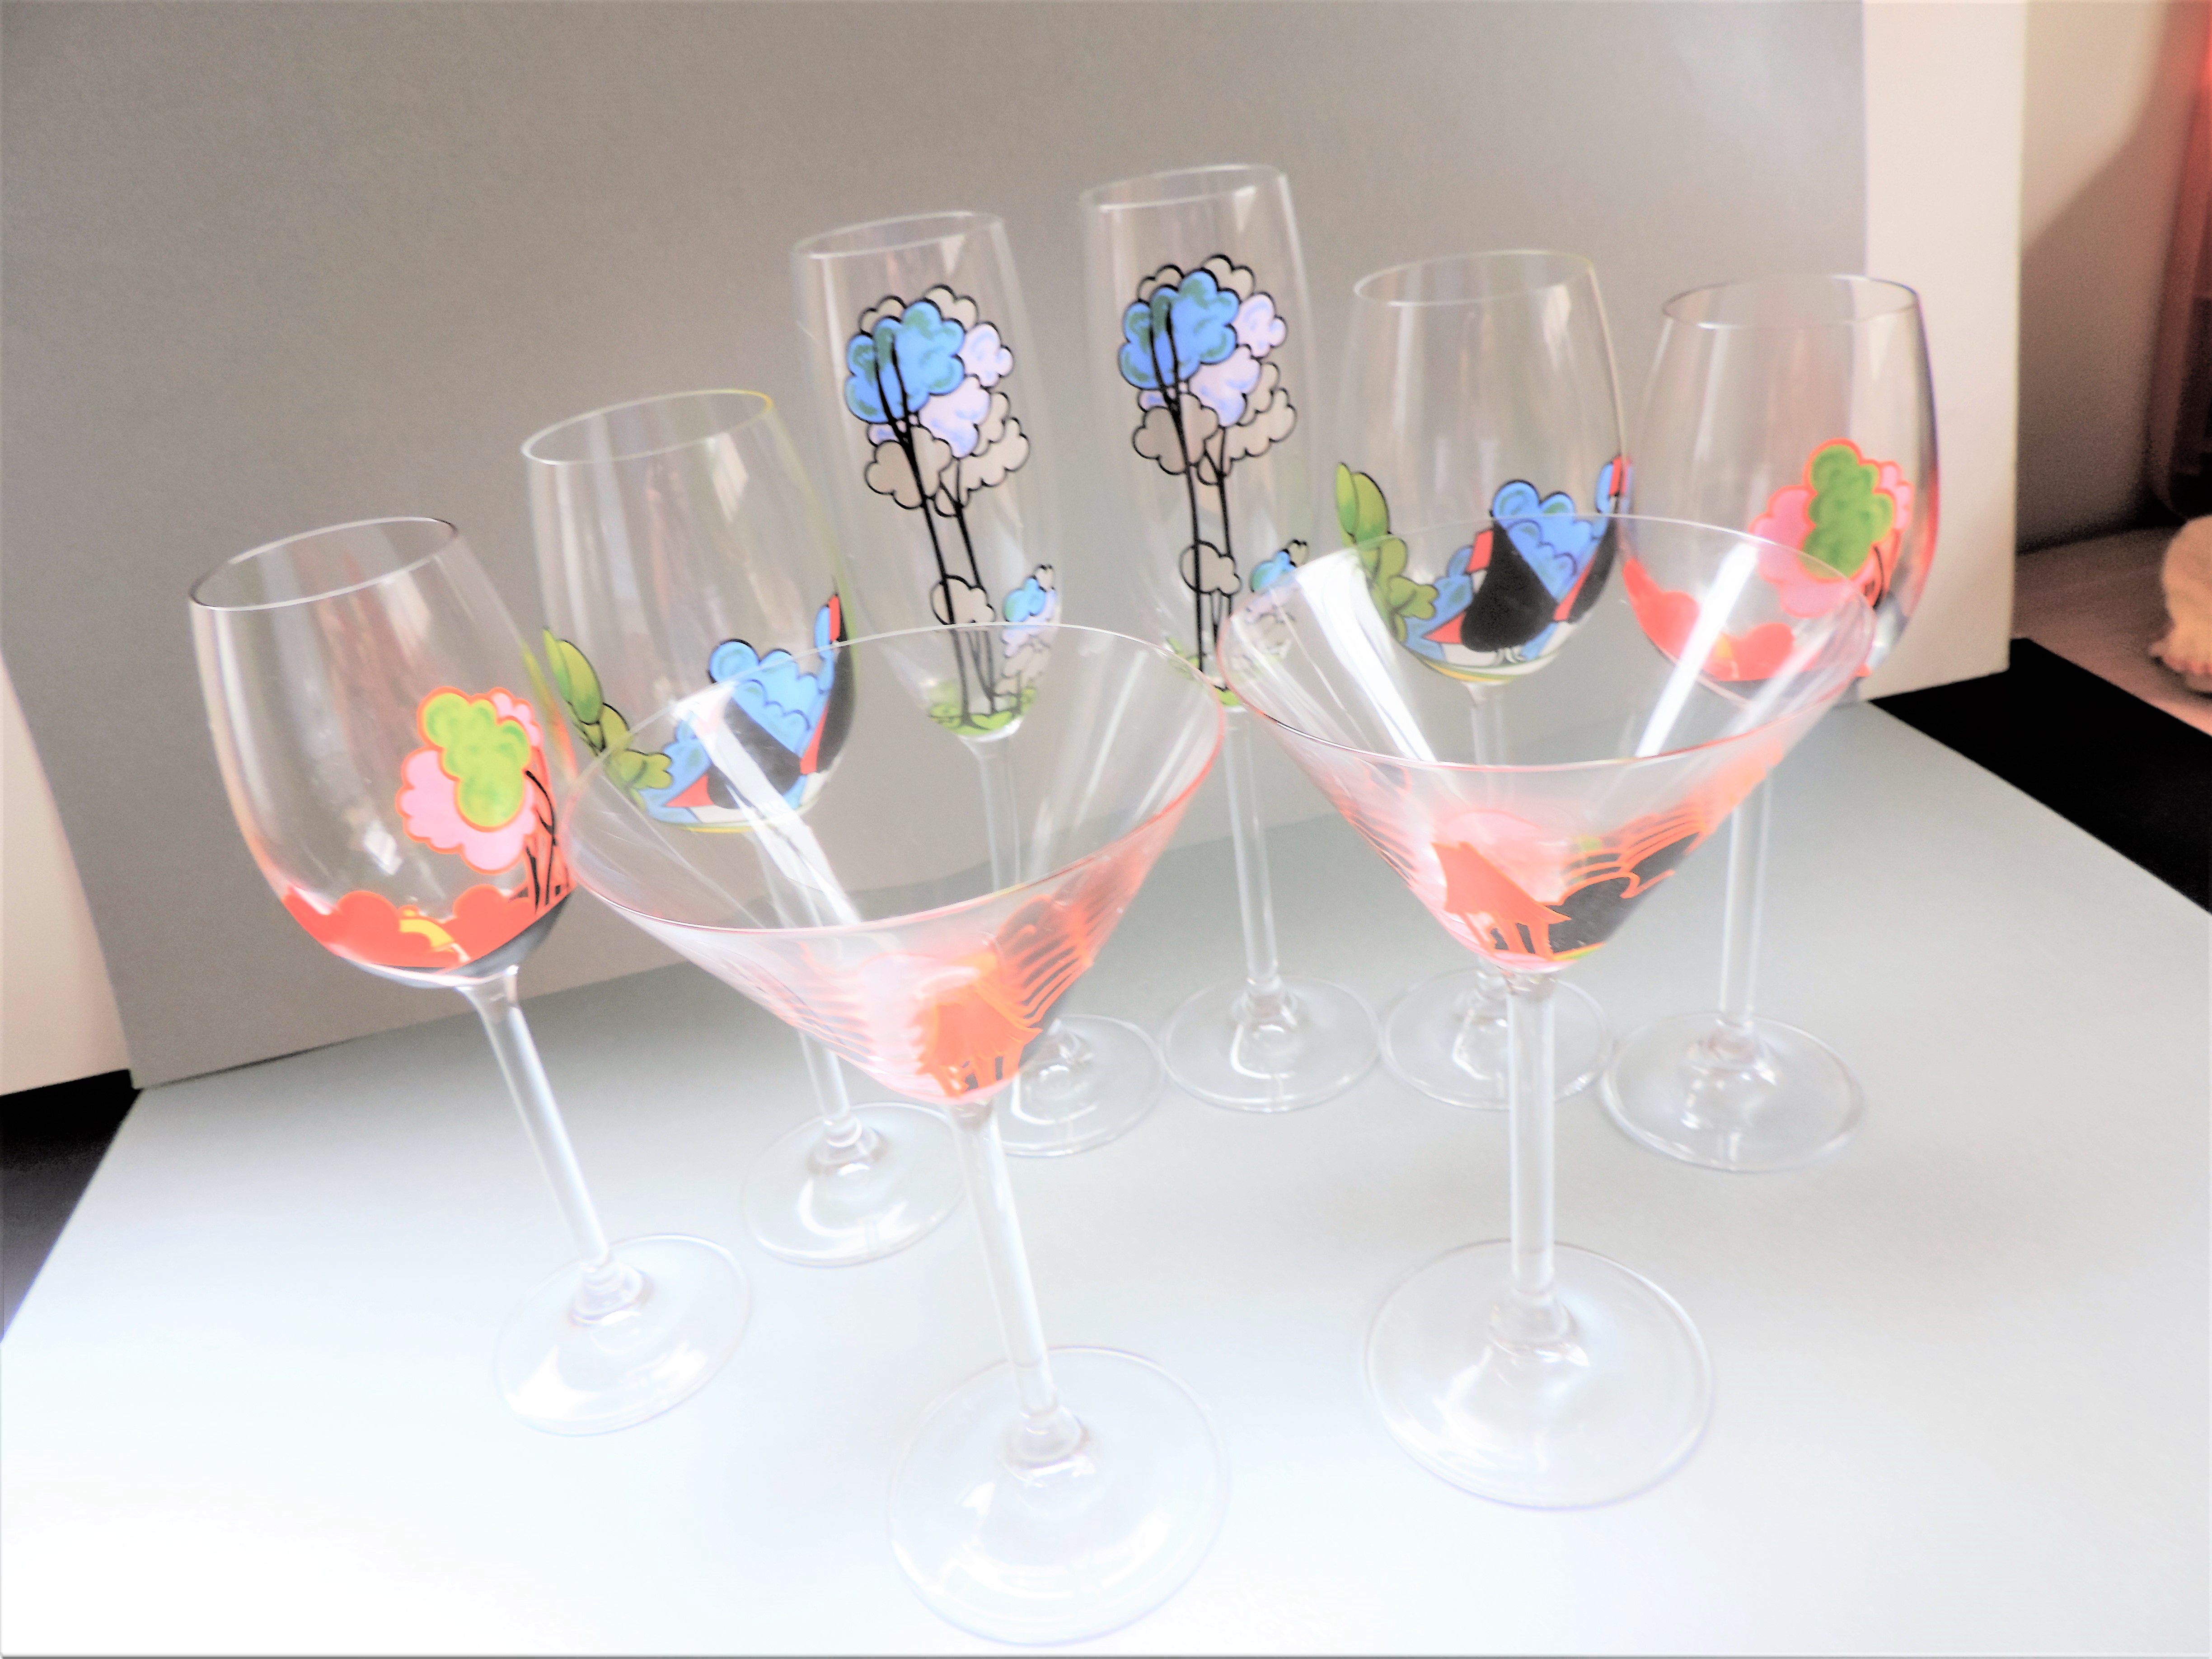 Suite Vintage French Hand Painted Wine & Cocktail Glasses - Image 2 of 5